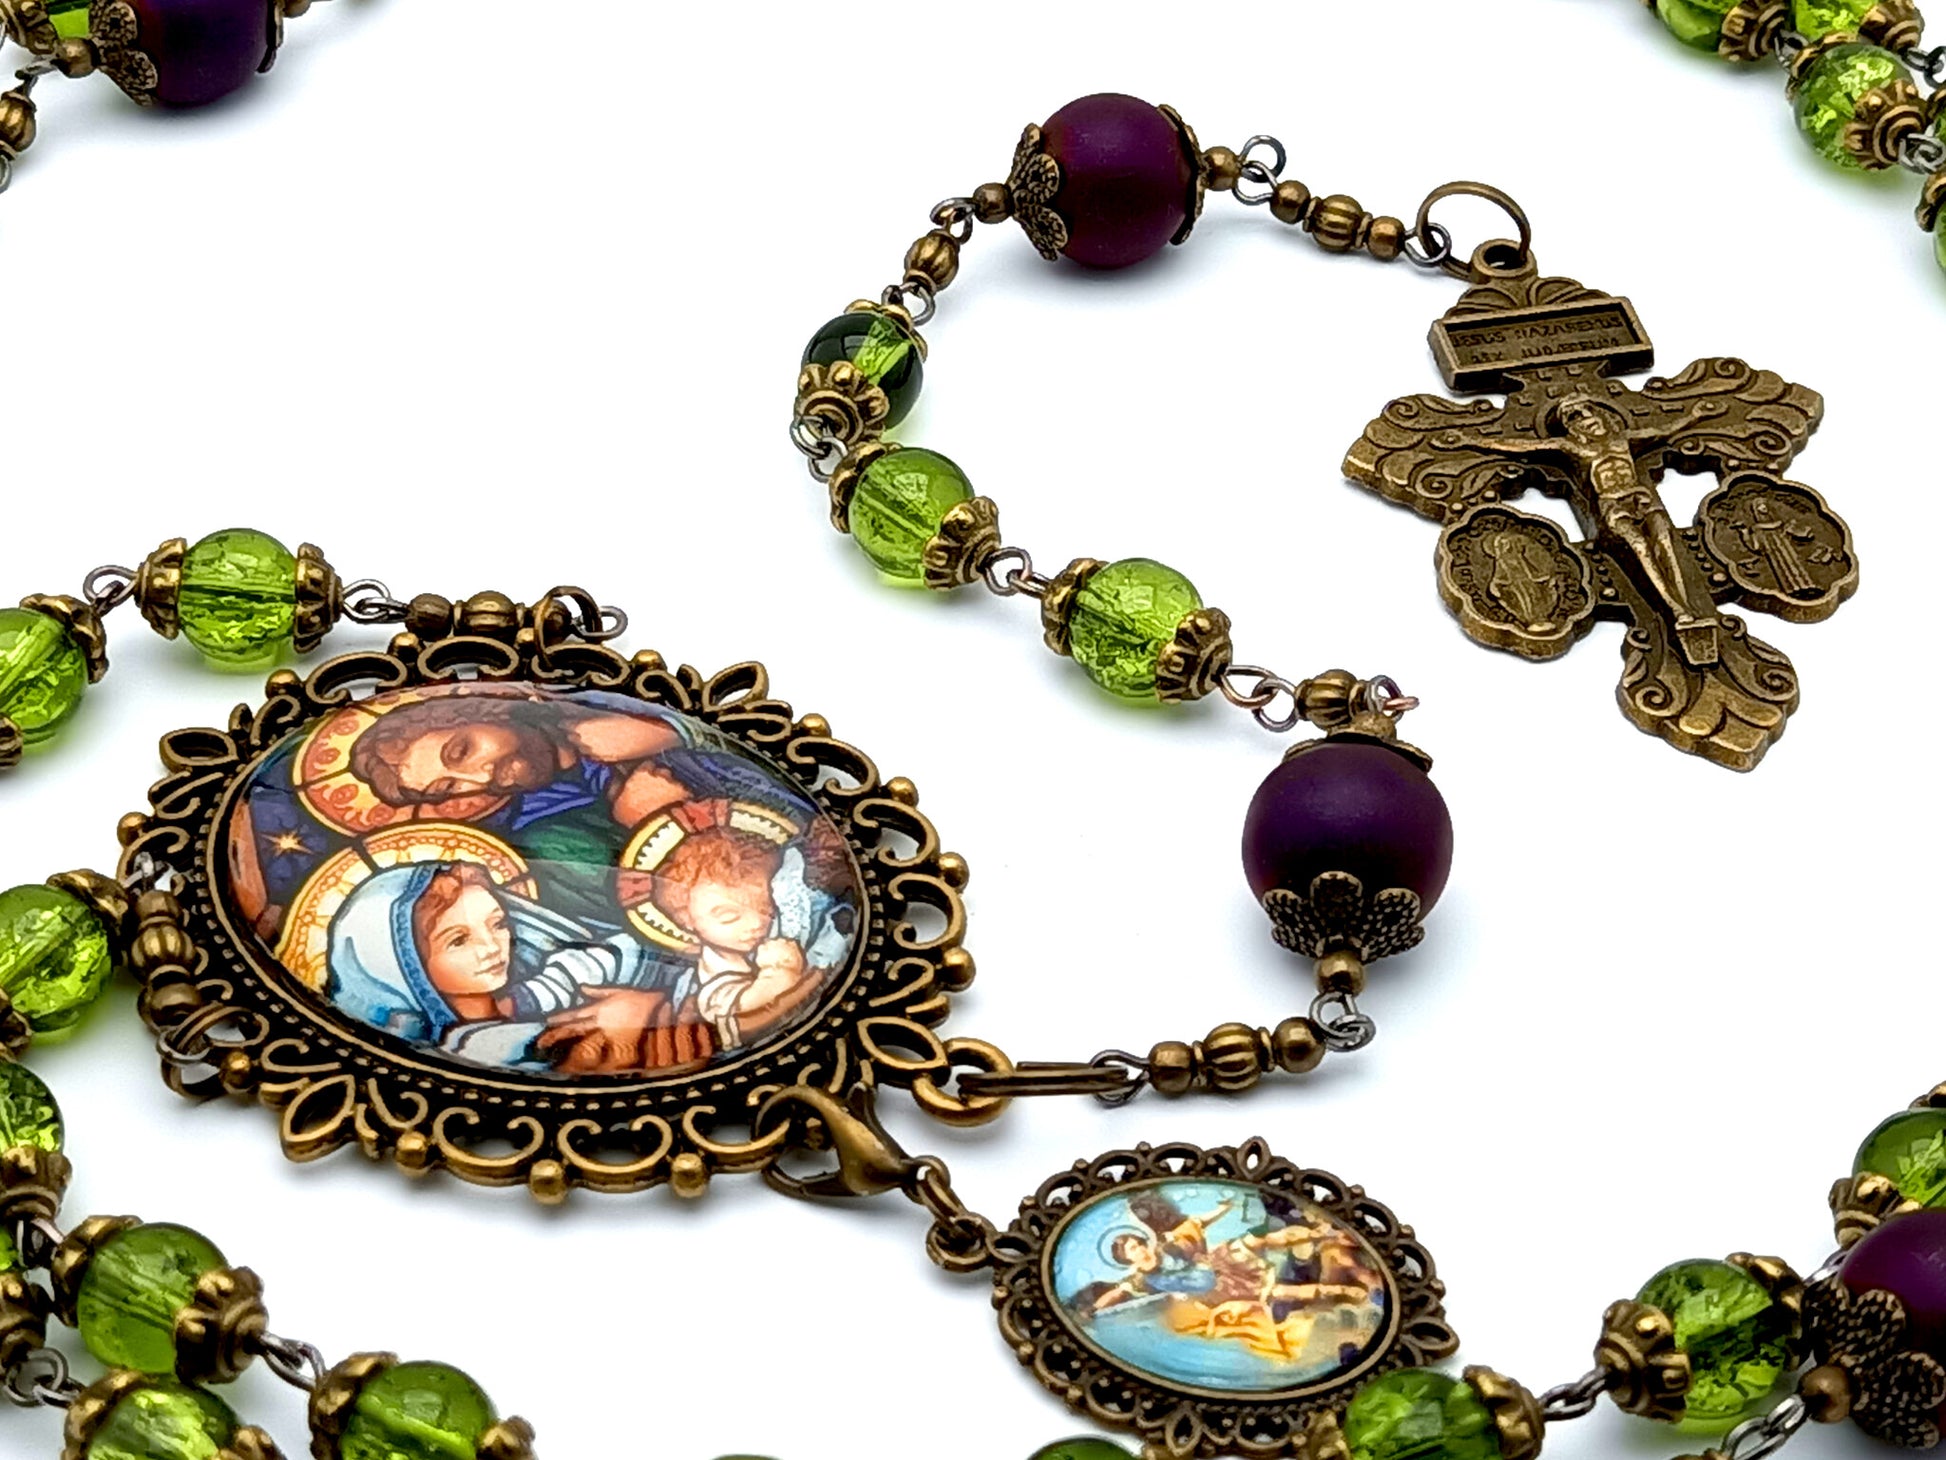 Holy Family unique rosary beads with vintage style glass beads and Saint Michael medal and brass crucifix.